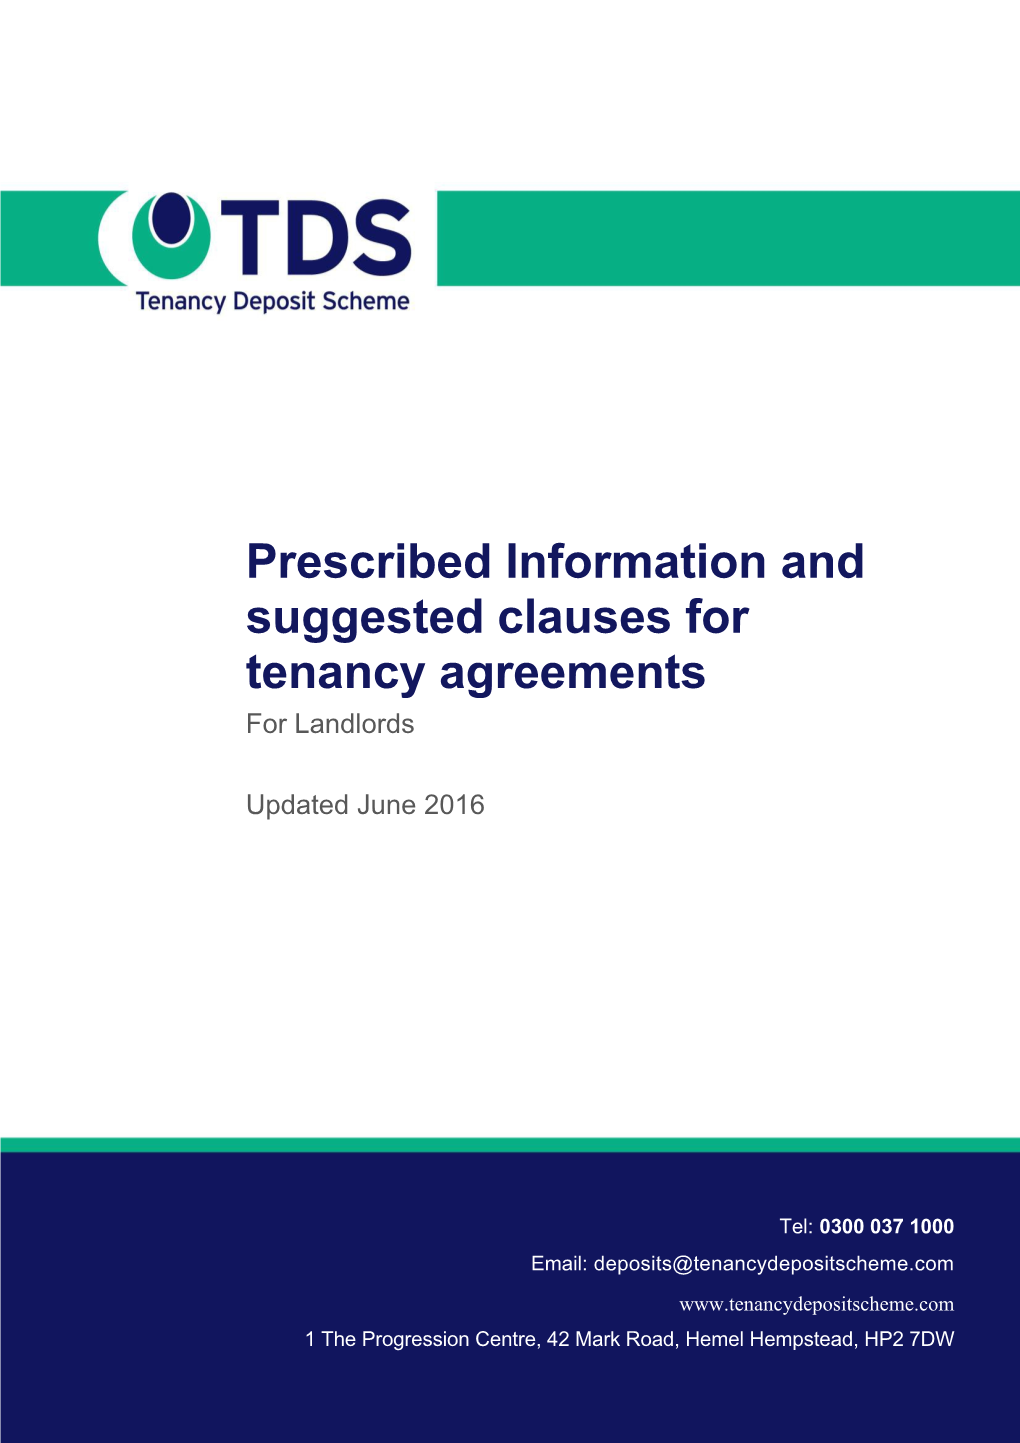 Prescribed Information and Suggested Clauses for Tenancy Agreements